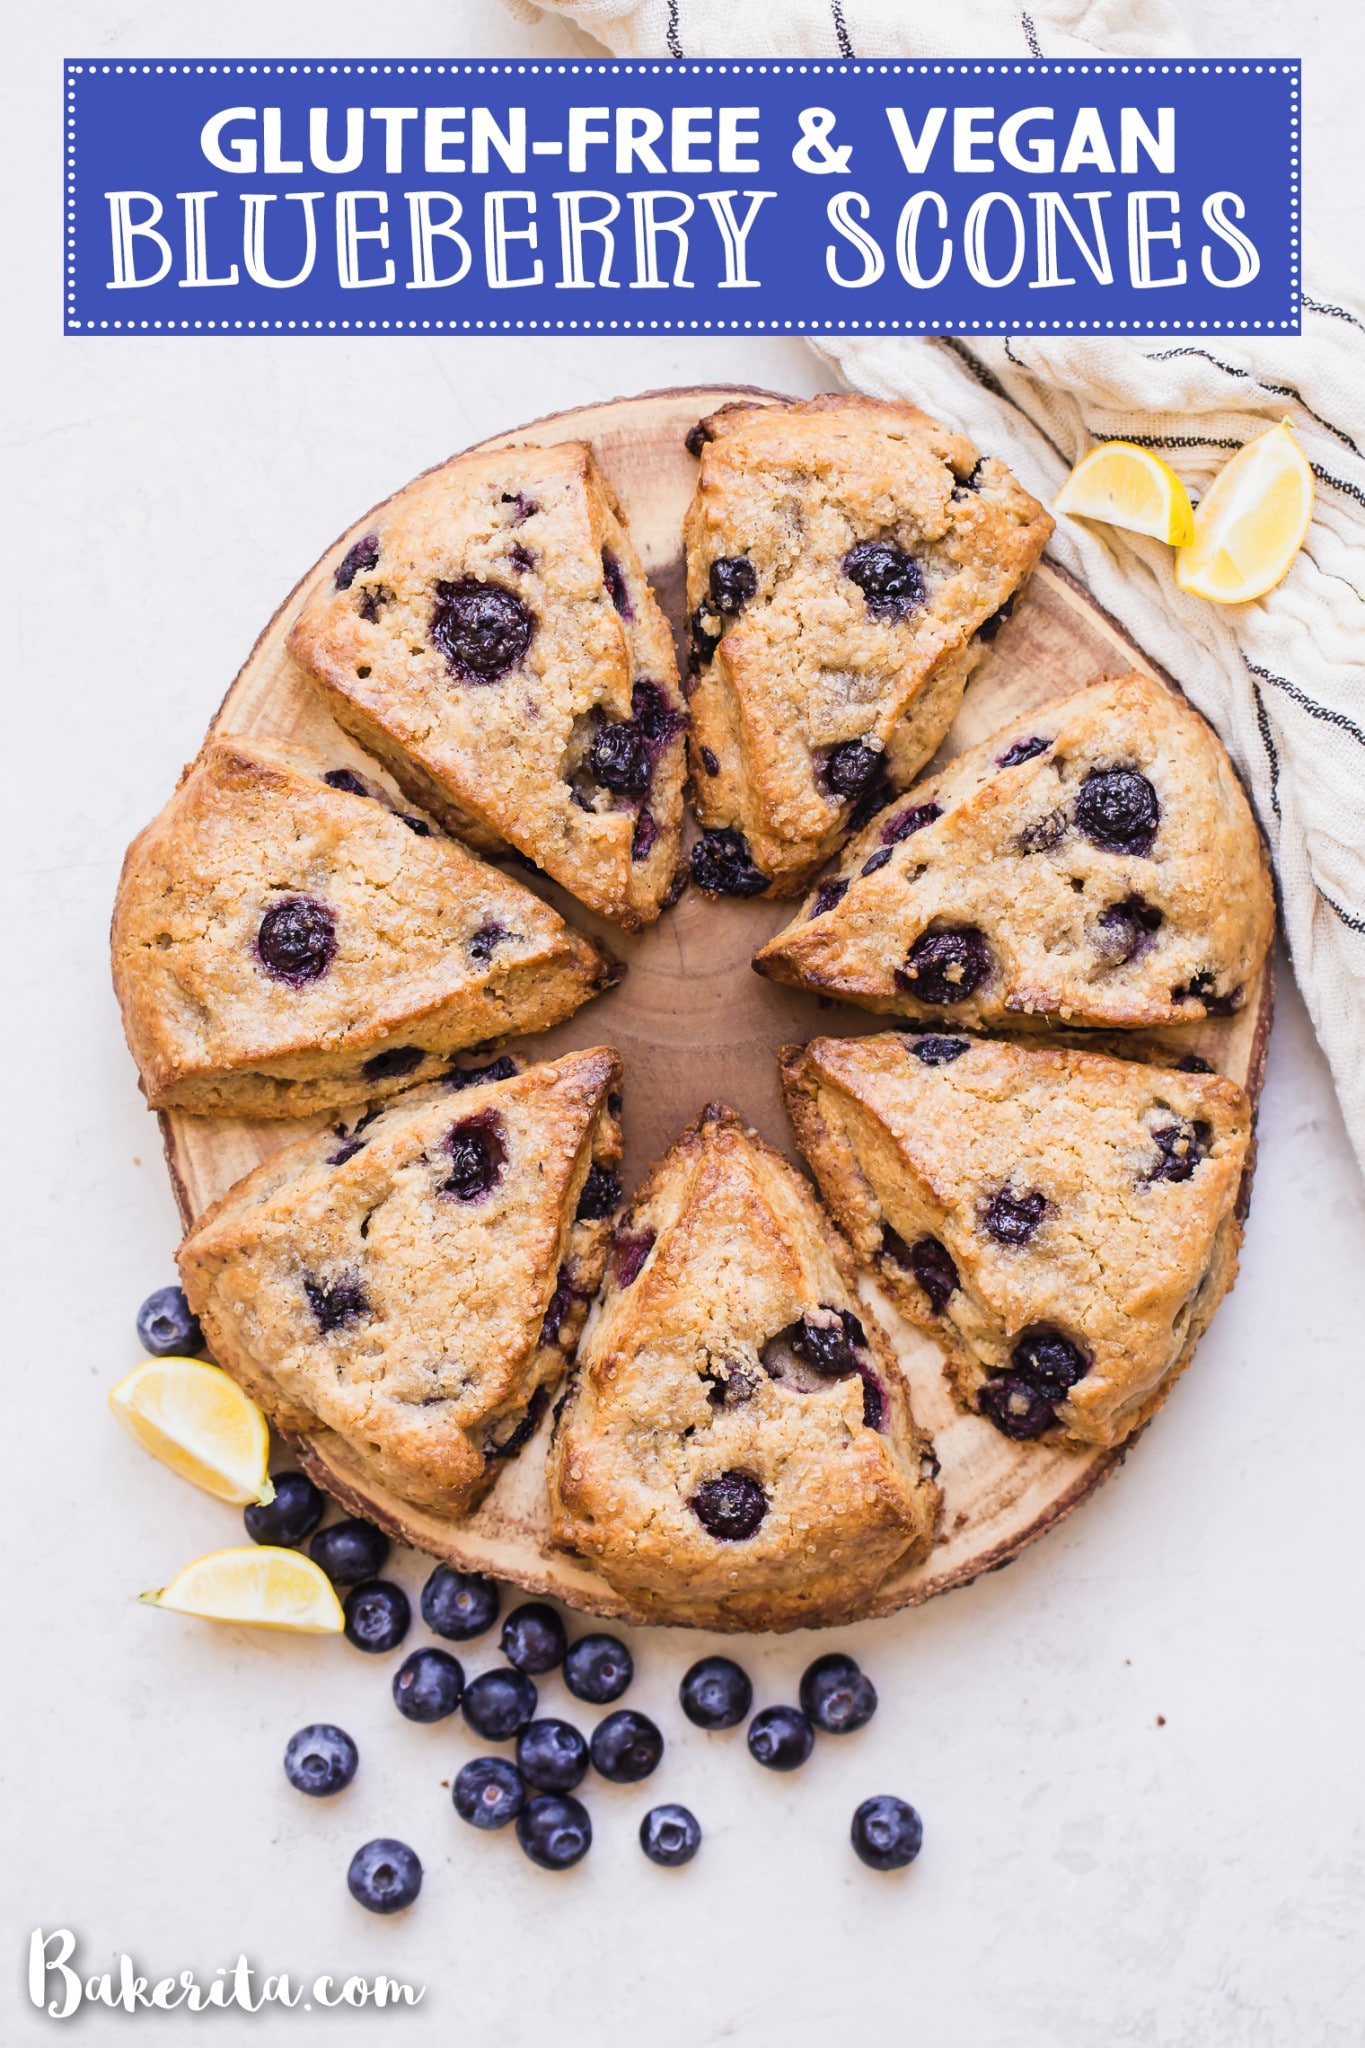 Gluten-Free Vegan Lemon Blueberry Scones are going to become your new favorite breakfast and snack. They have a tender texture with a crispy exterior and are full of bright, lemony flavor. 